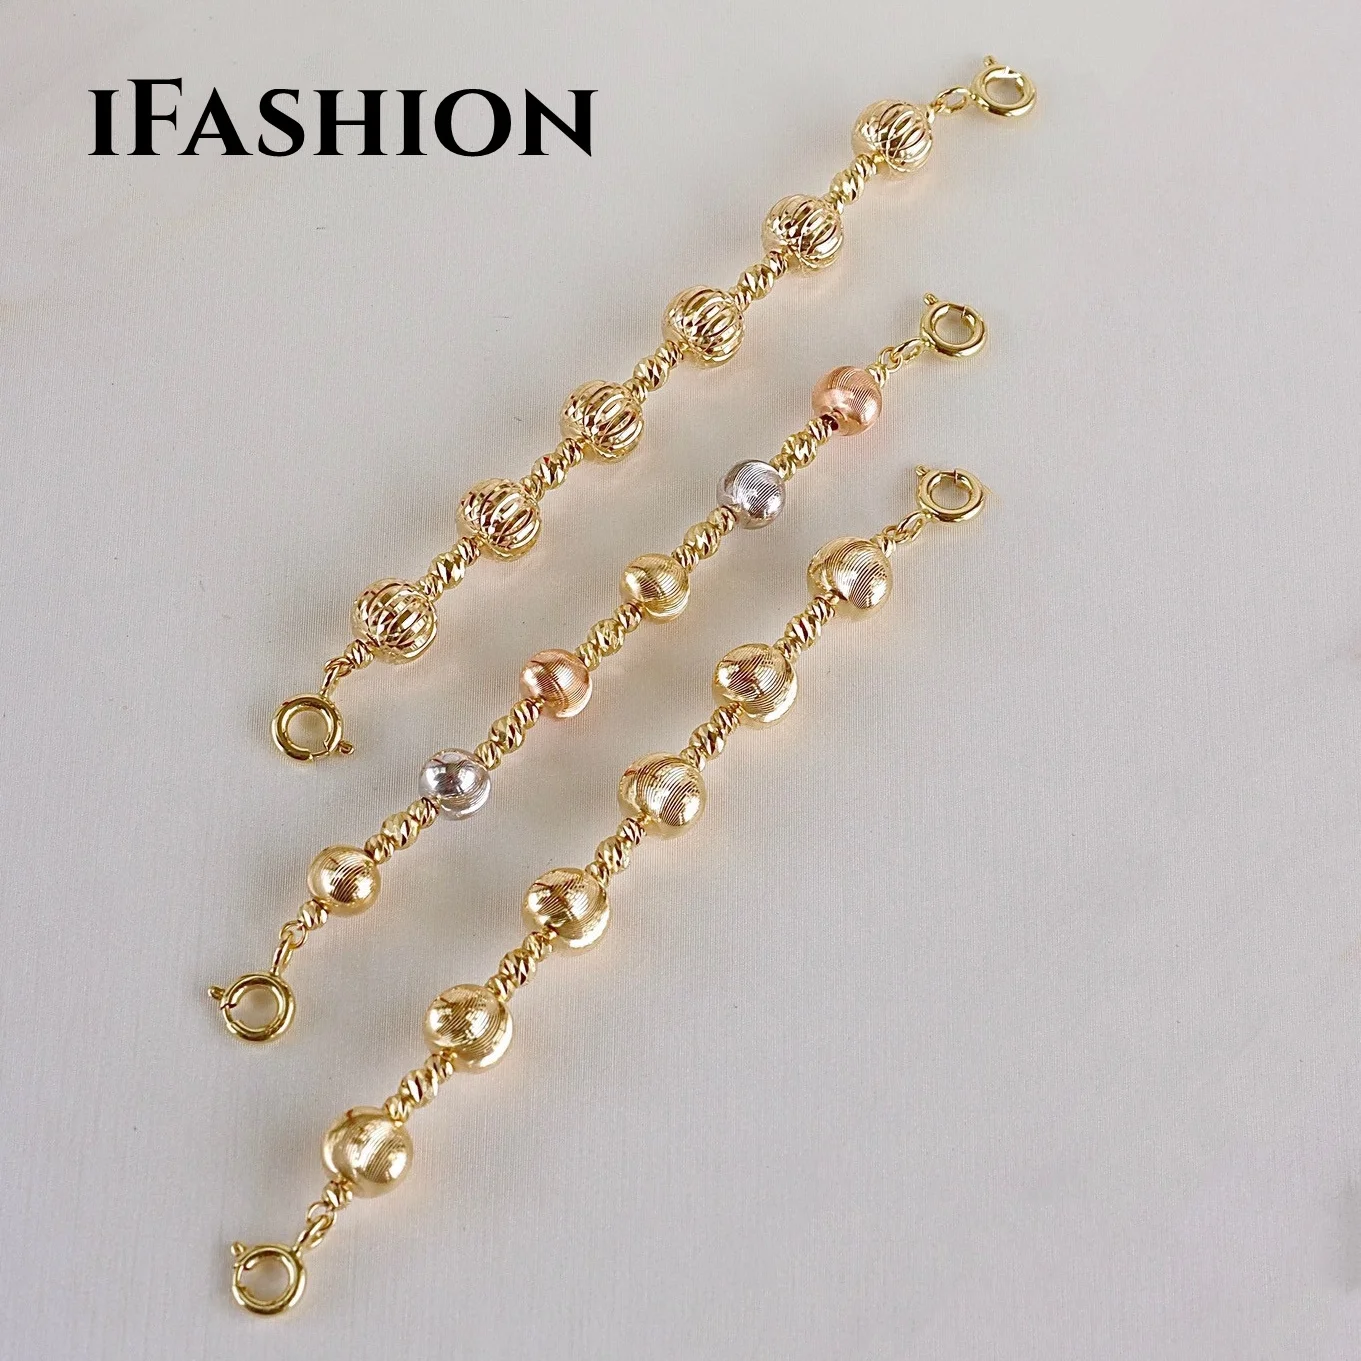 

IFASHION Extension Chain Necklace Parts Colored Gold 18K Solid Yellow Gold (AU750)Italian Craft Imported Chain Women